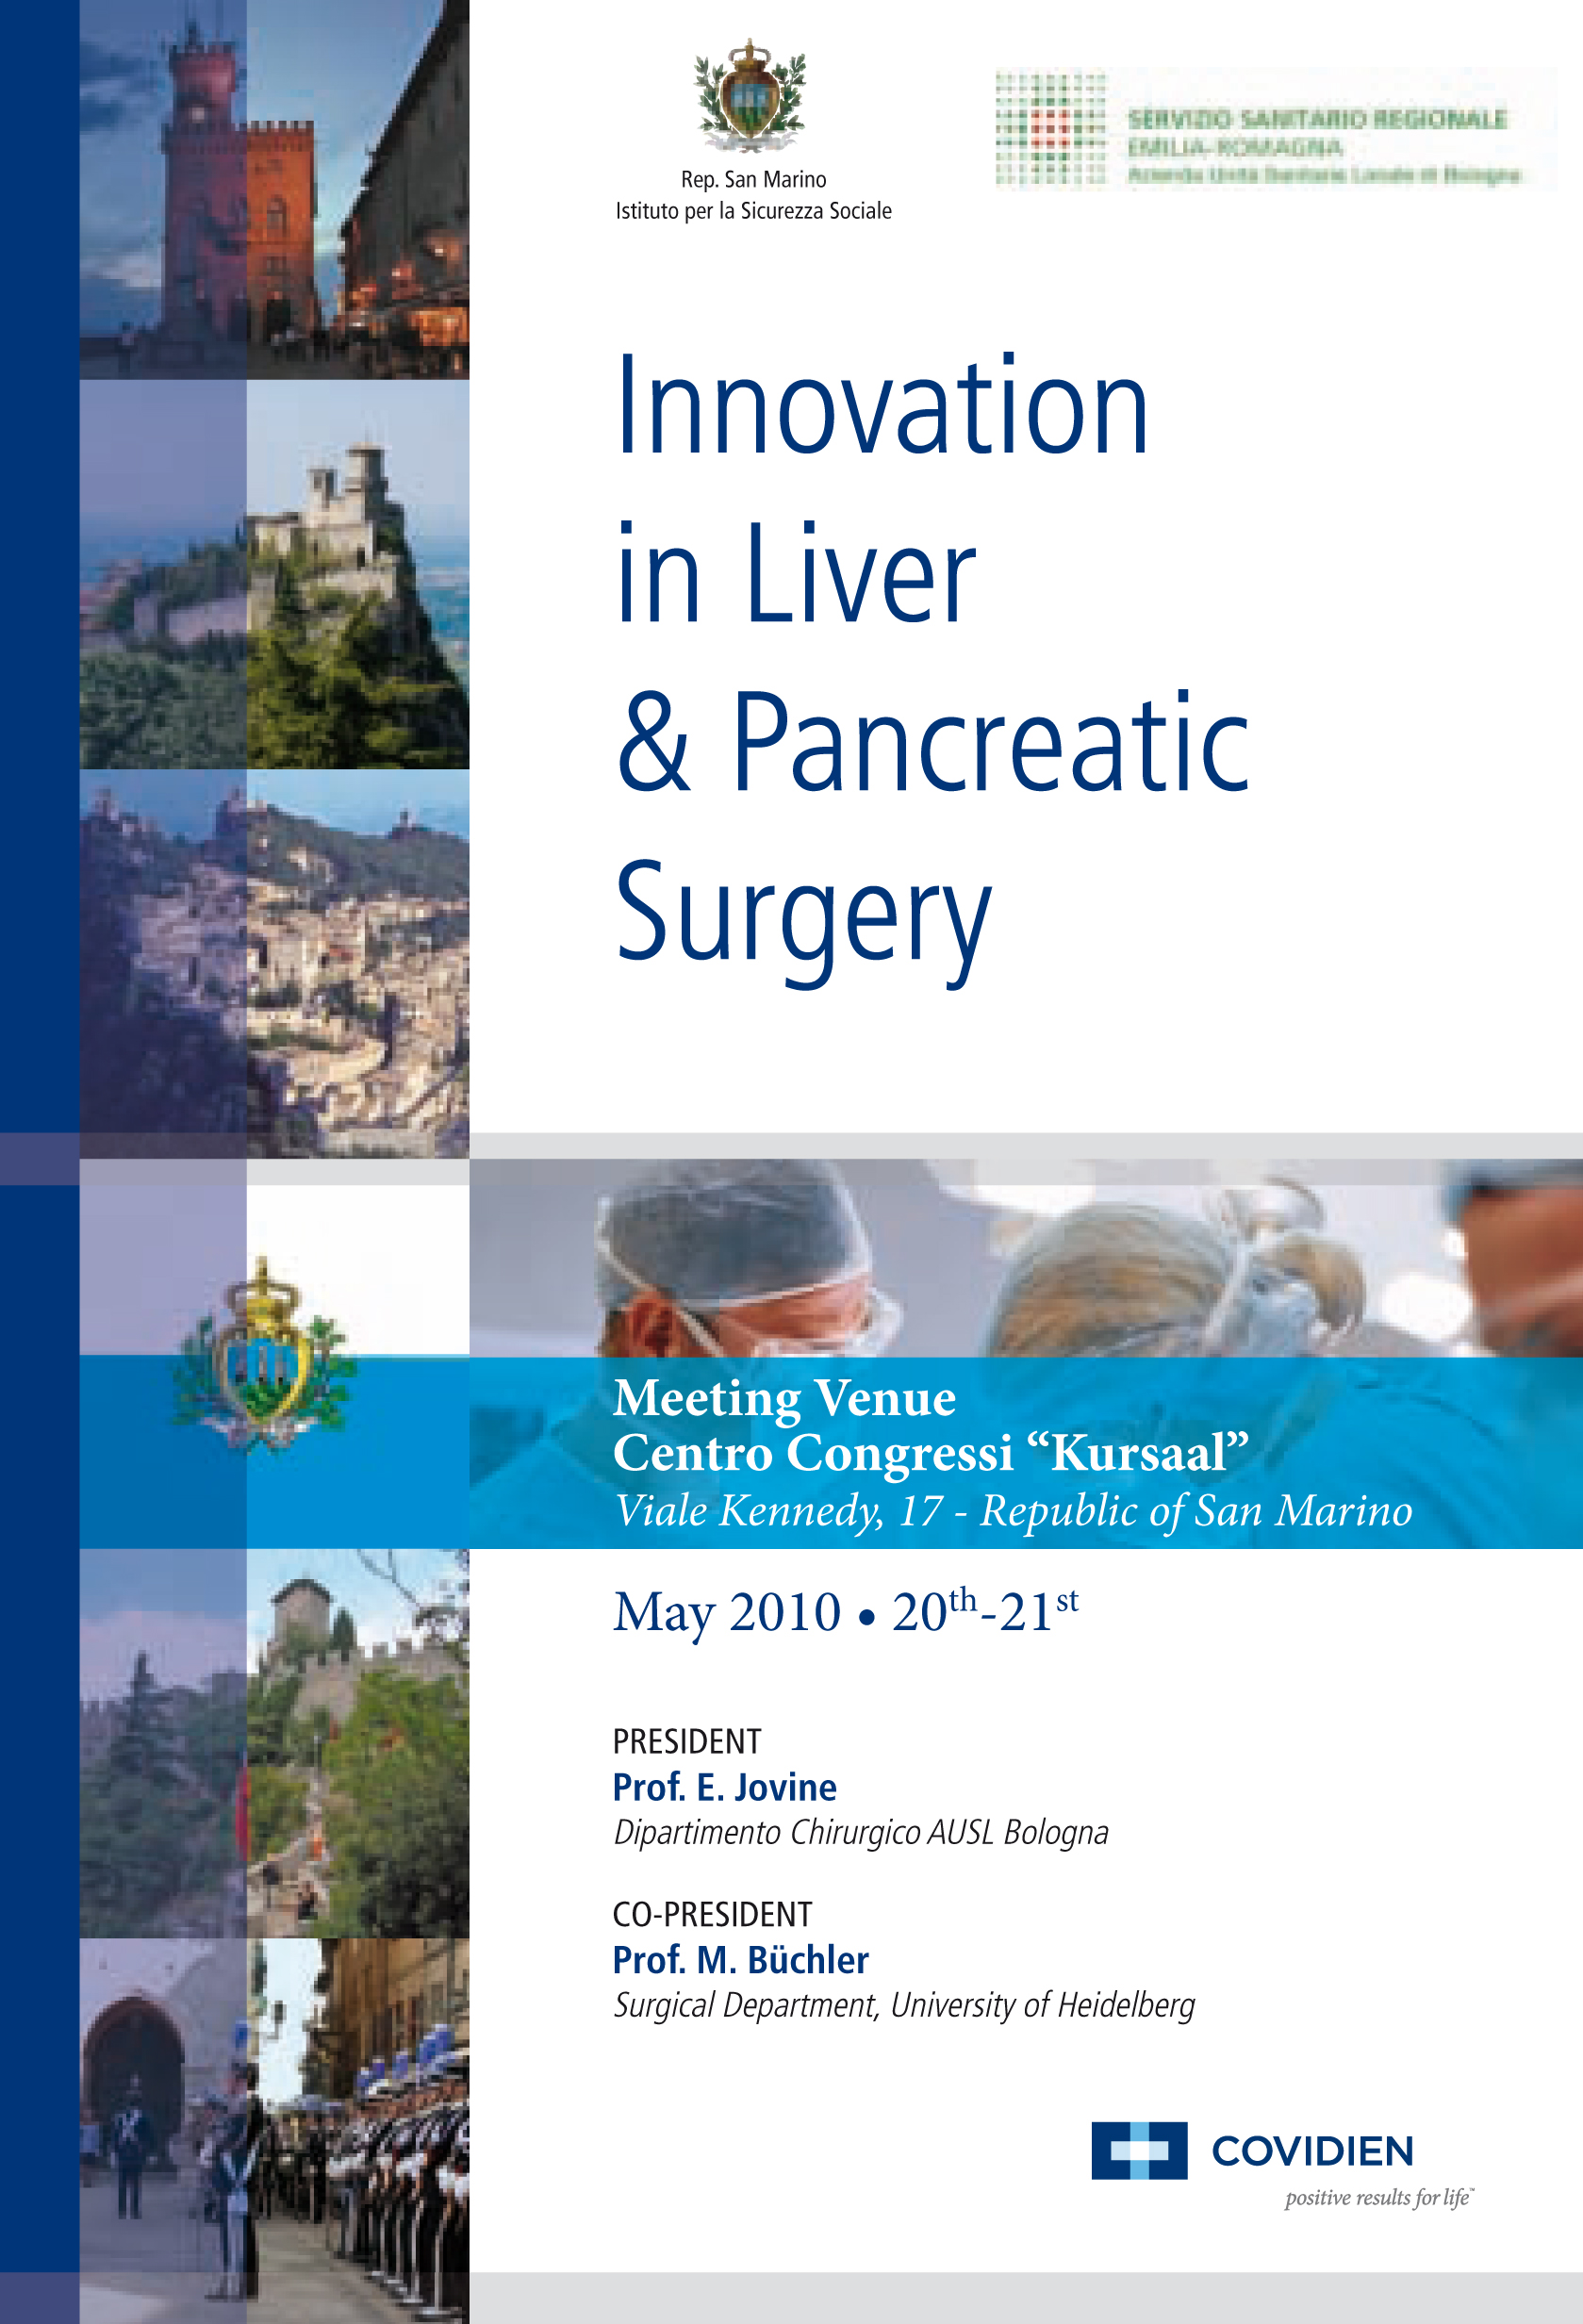 Innovation in Liver & Pancreatic Surgery